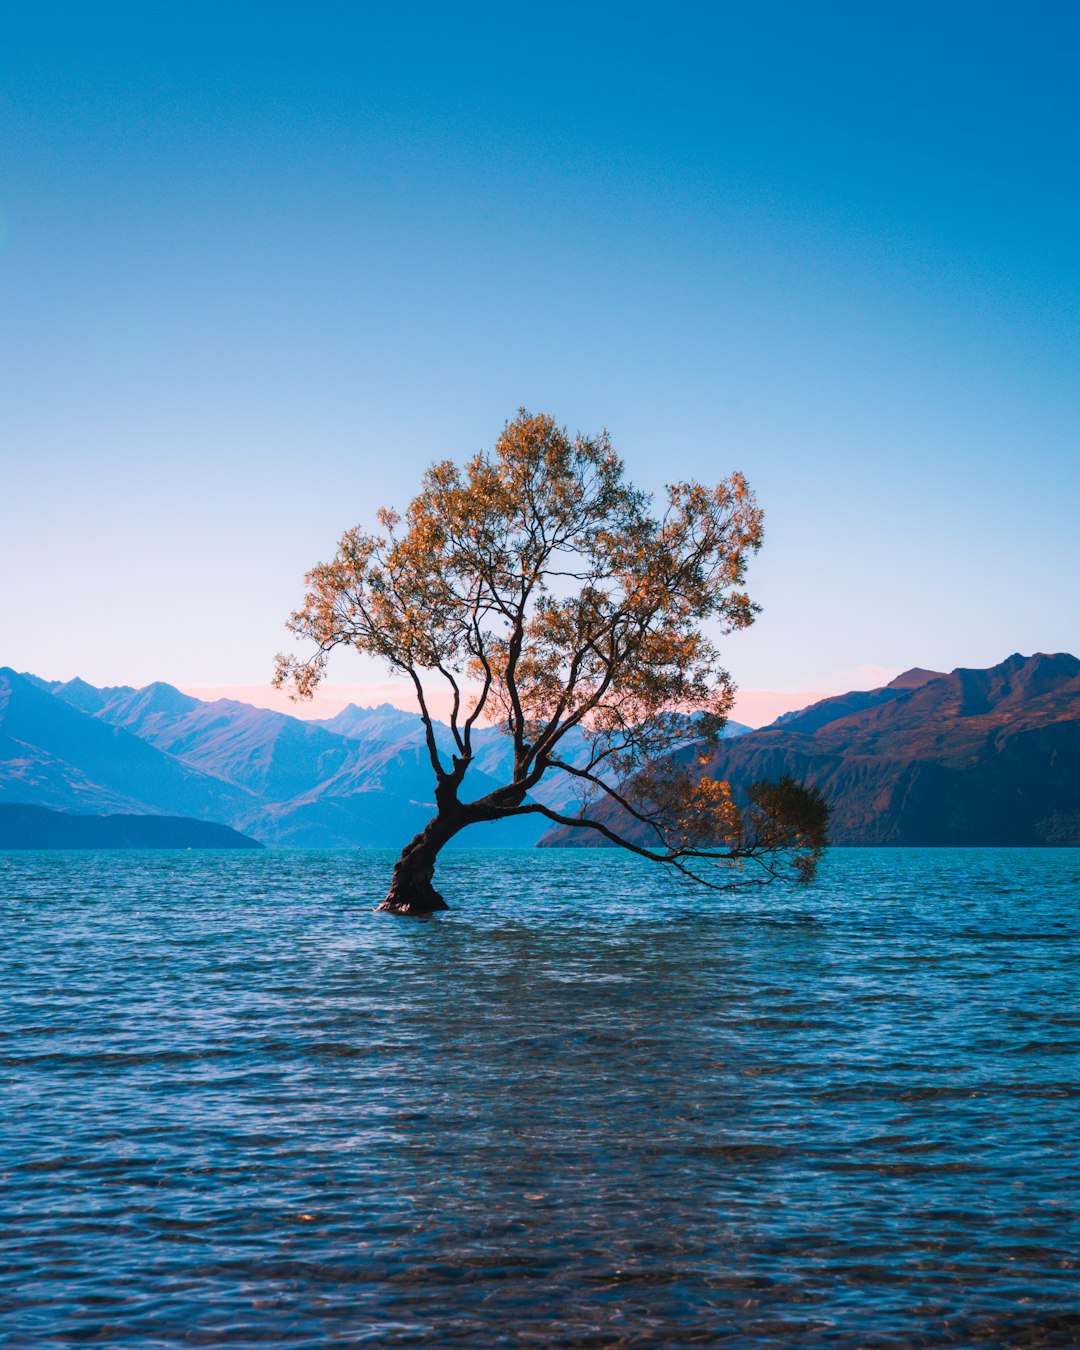 travelers stories about Lake in Wanaka, New Zealand